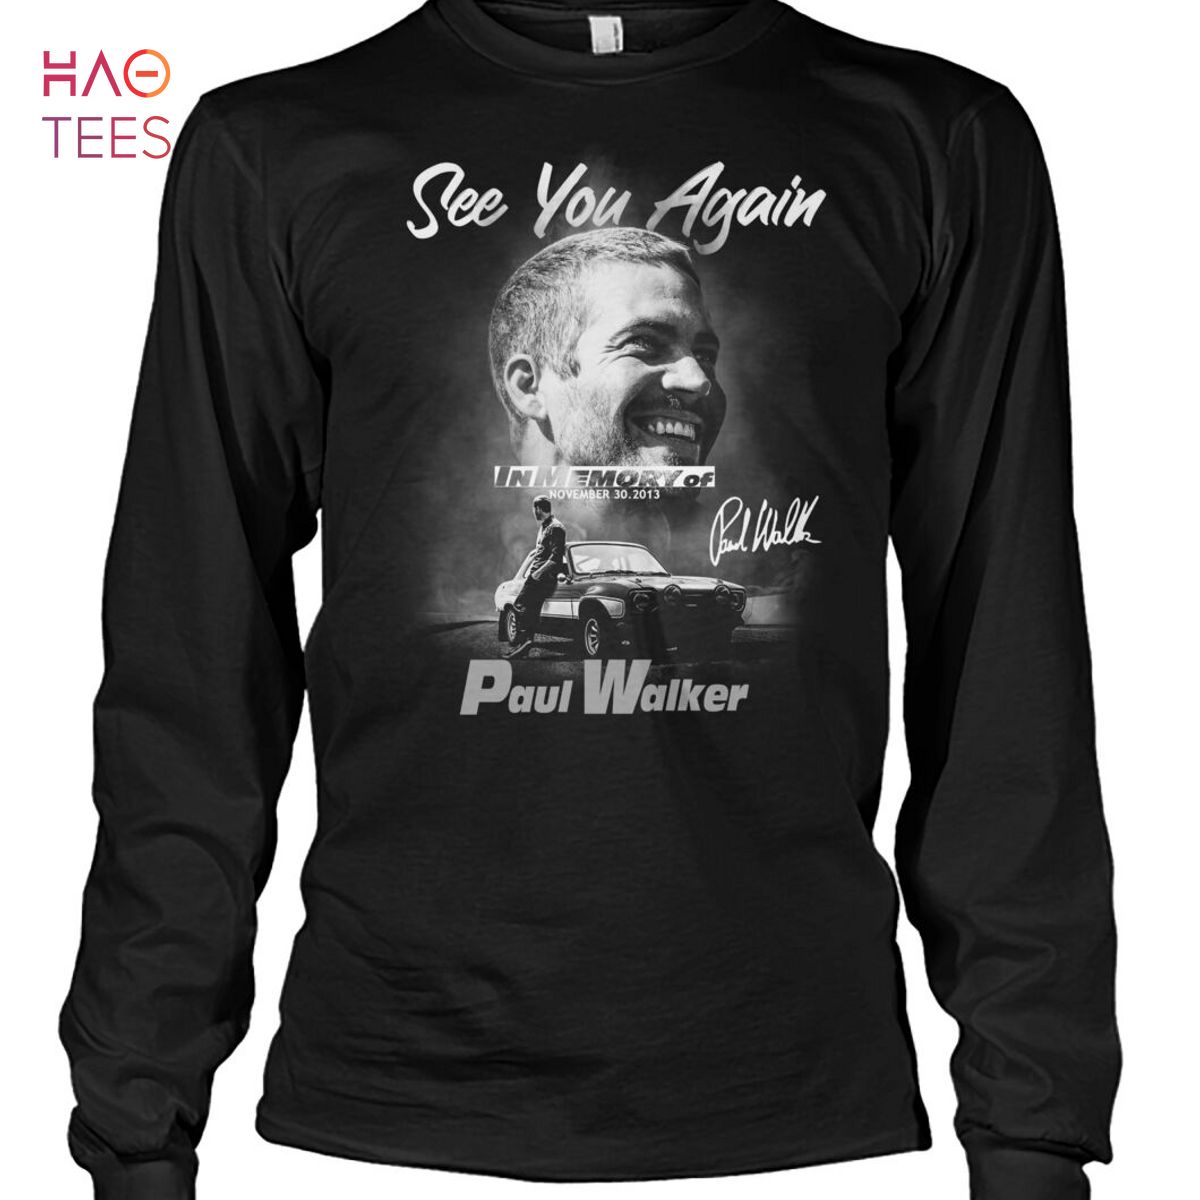 See You Again Paul Walker Shirt Limited Edition